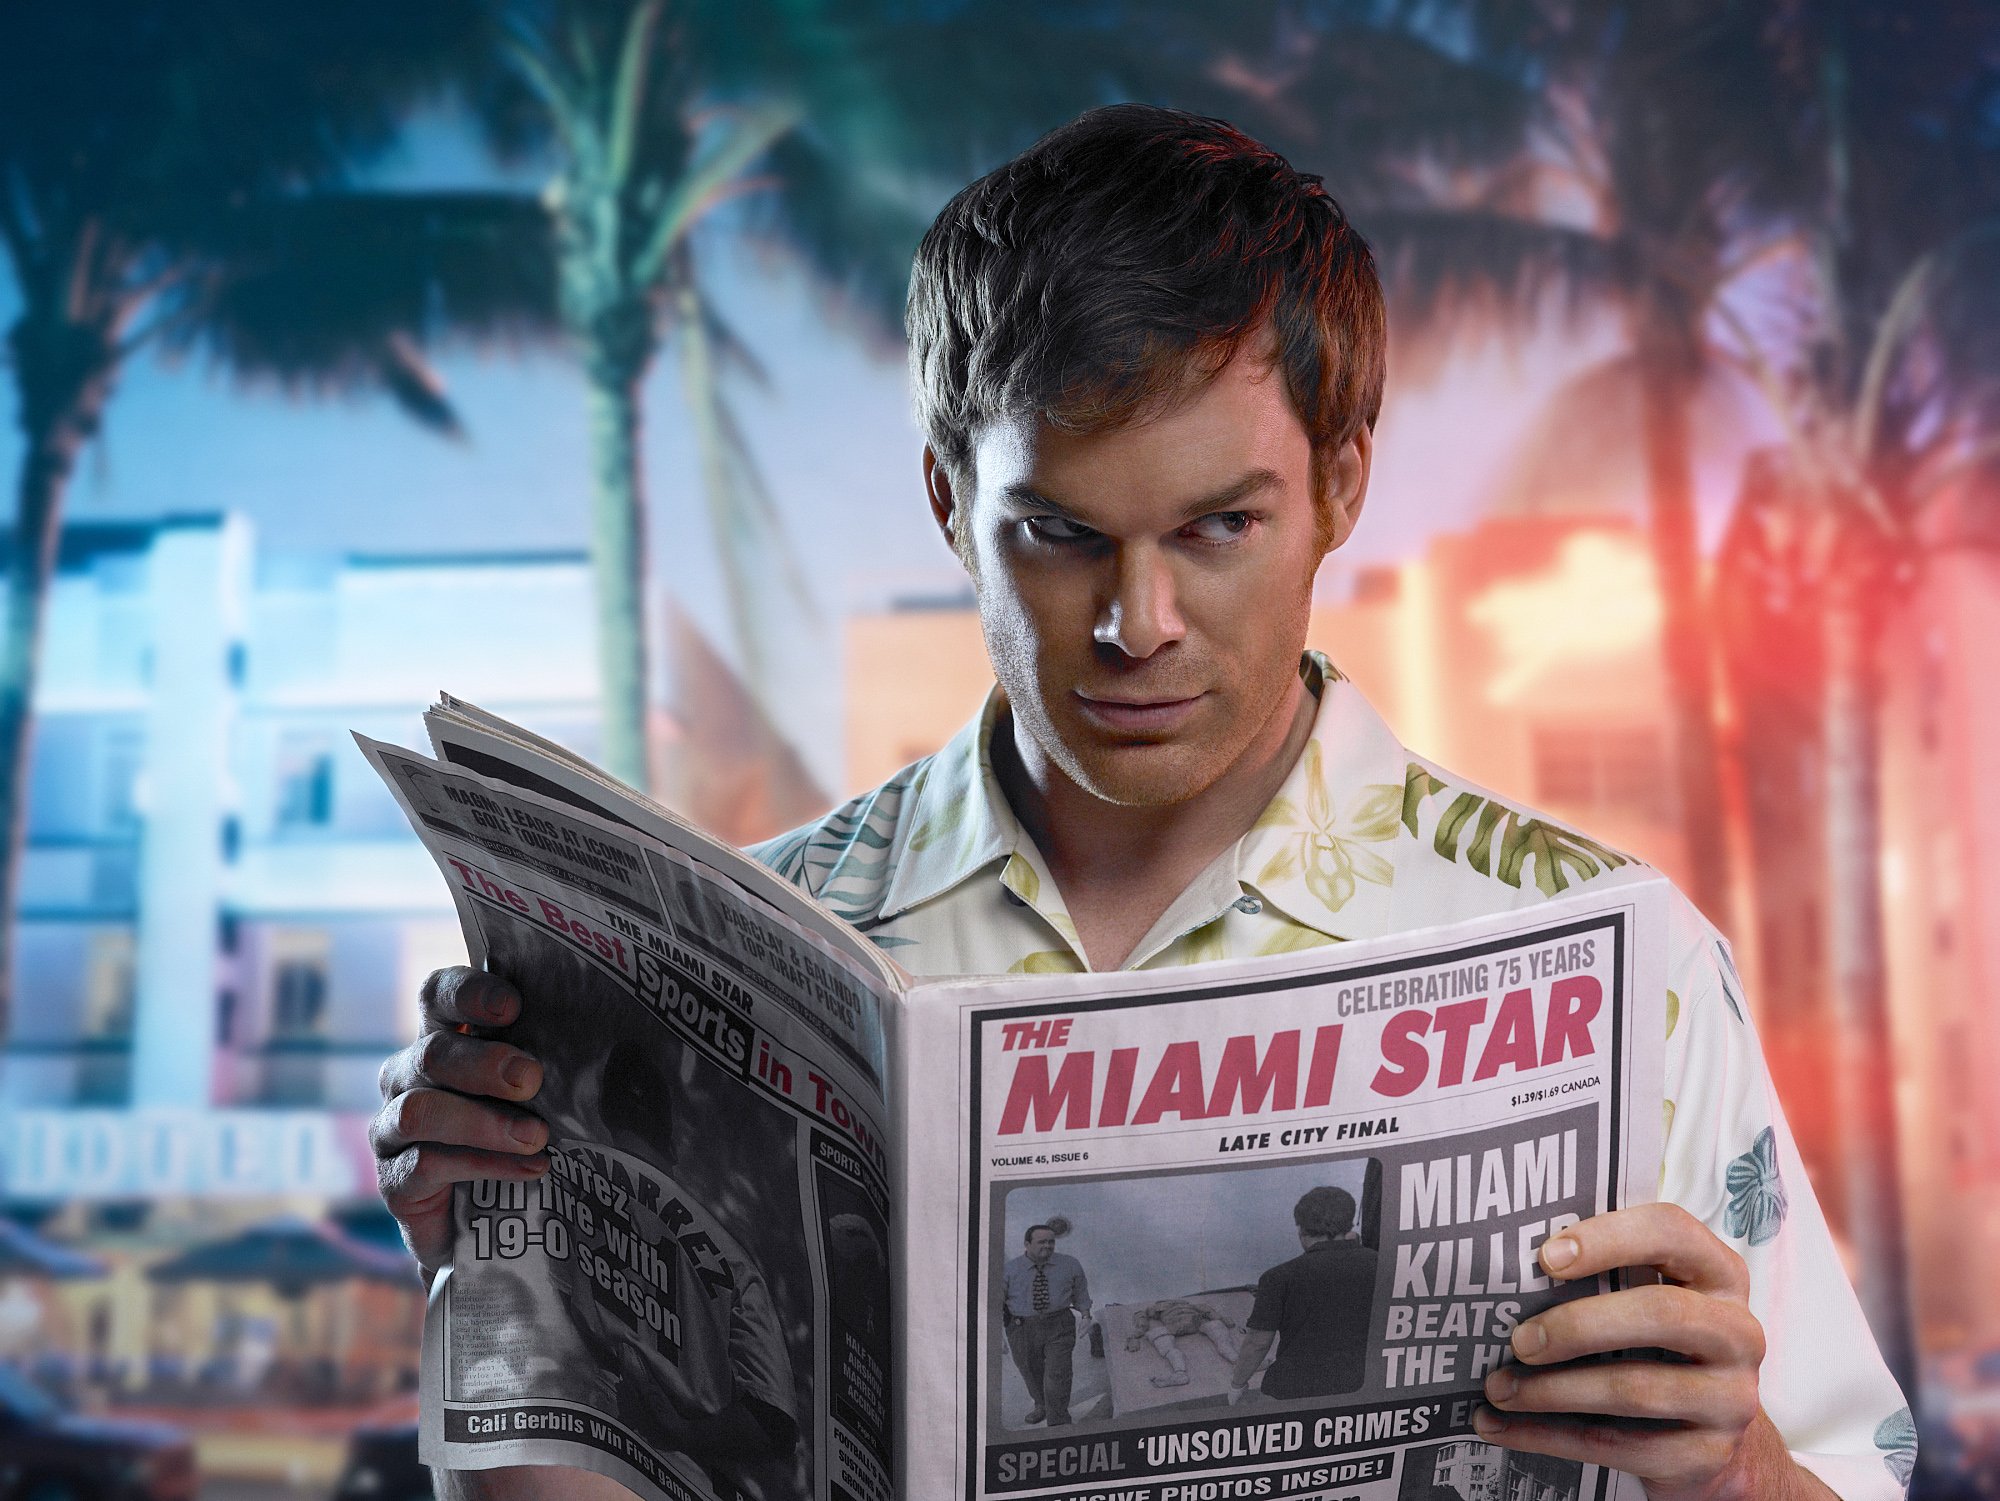 Dexter Morgan reads a newspaper while police car lights flash behind him.